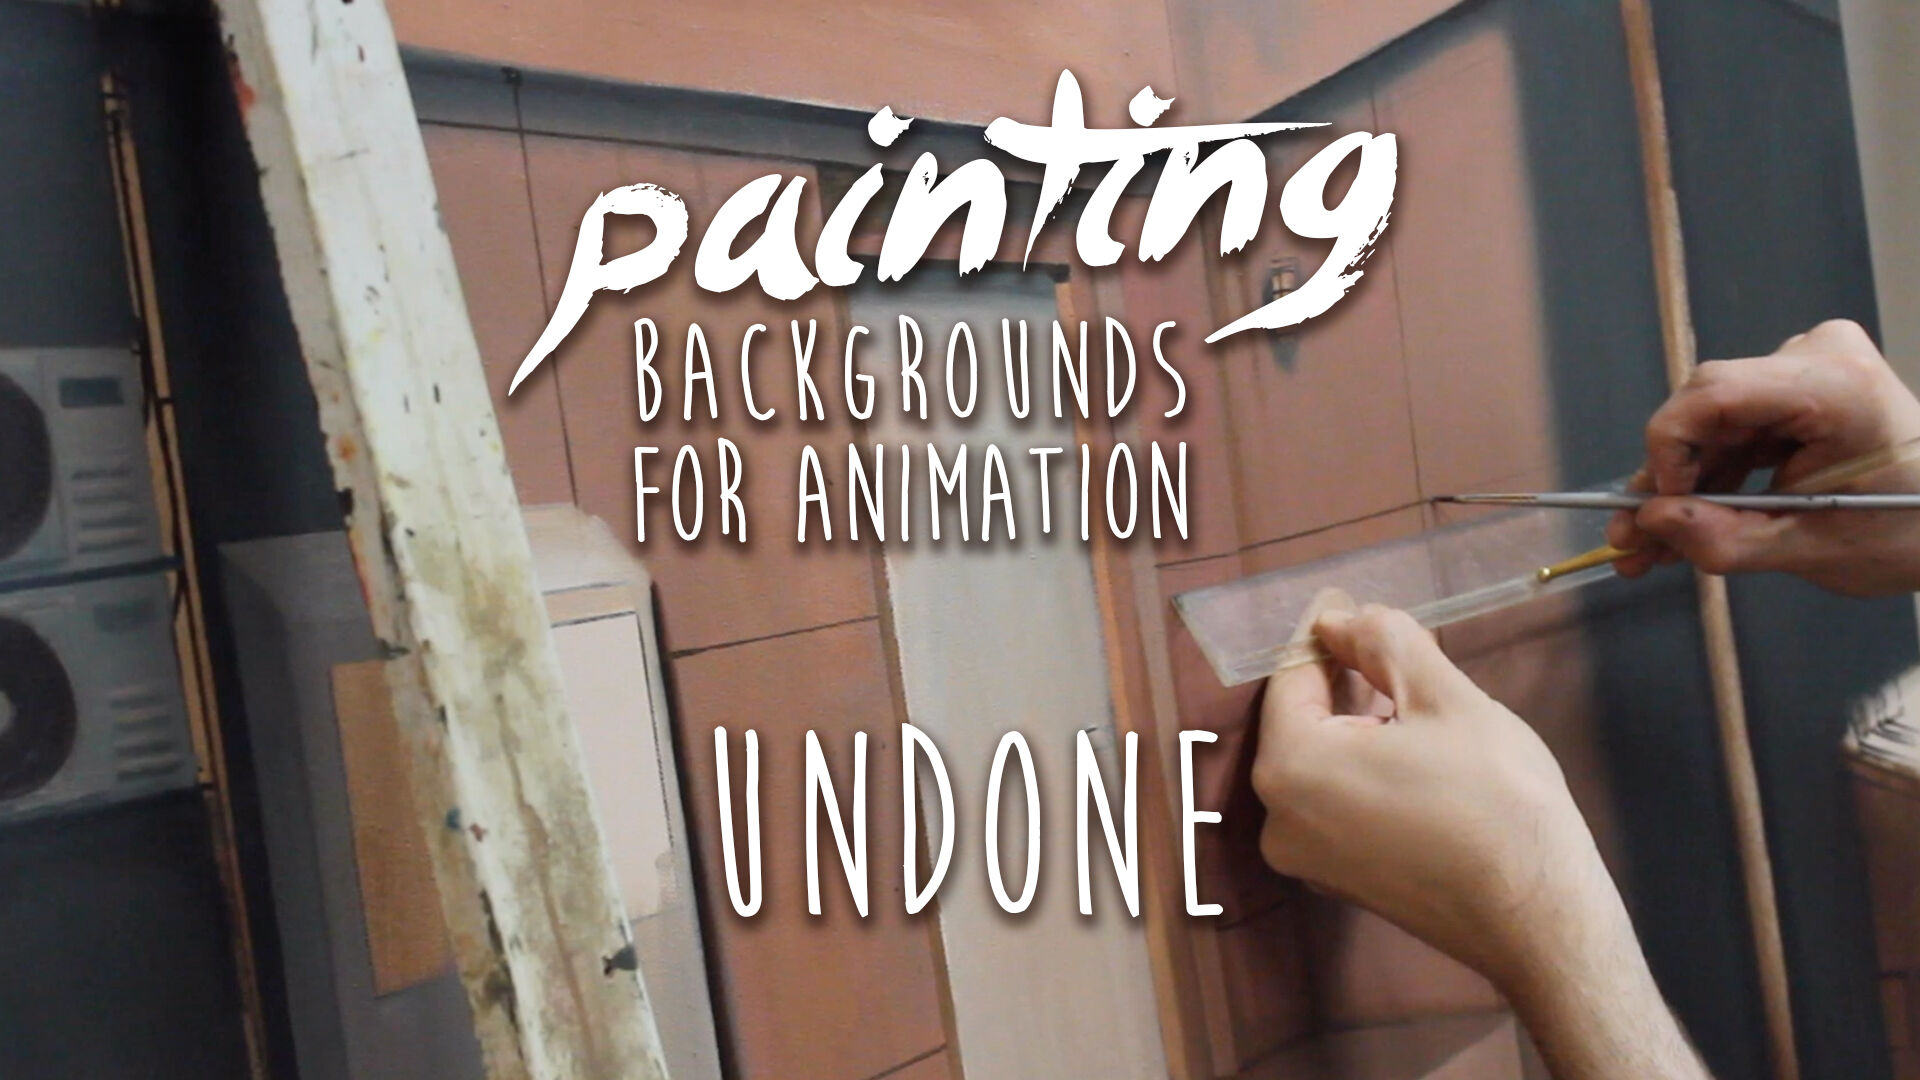 "Undone" | Painting Backgrounds For Animation #16